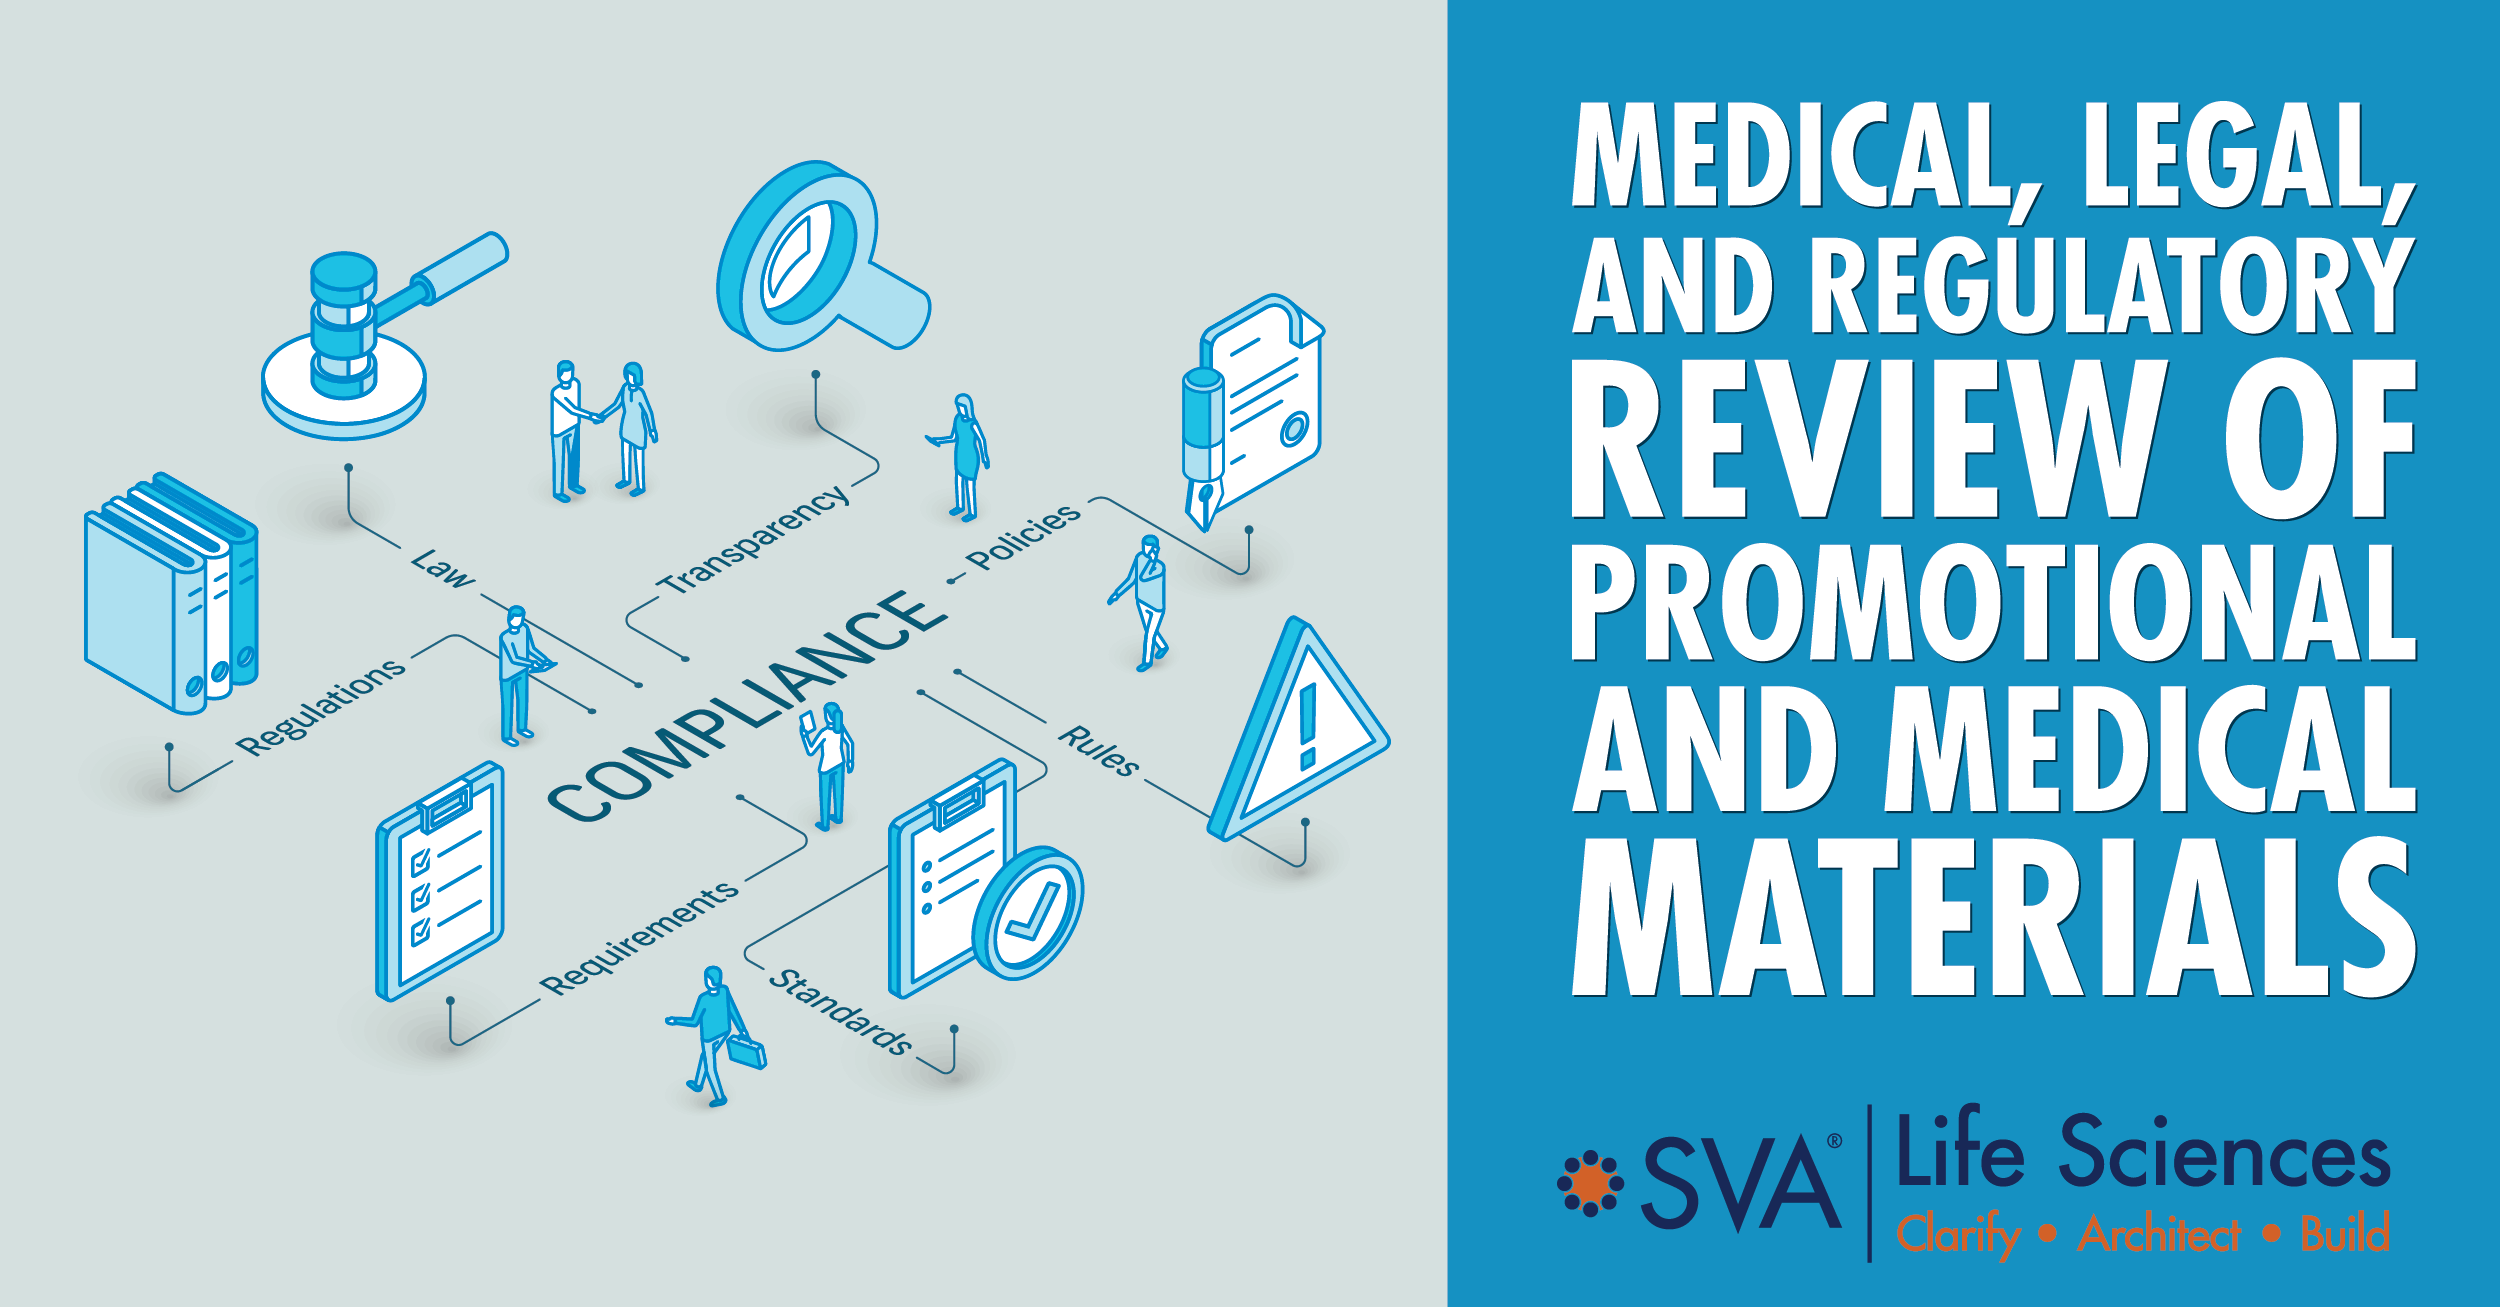 Compliance Review of Promotional and Medical Materials | SVA